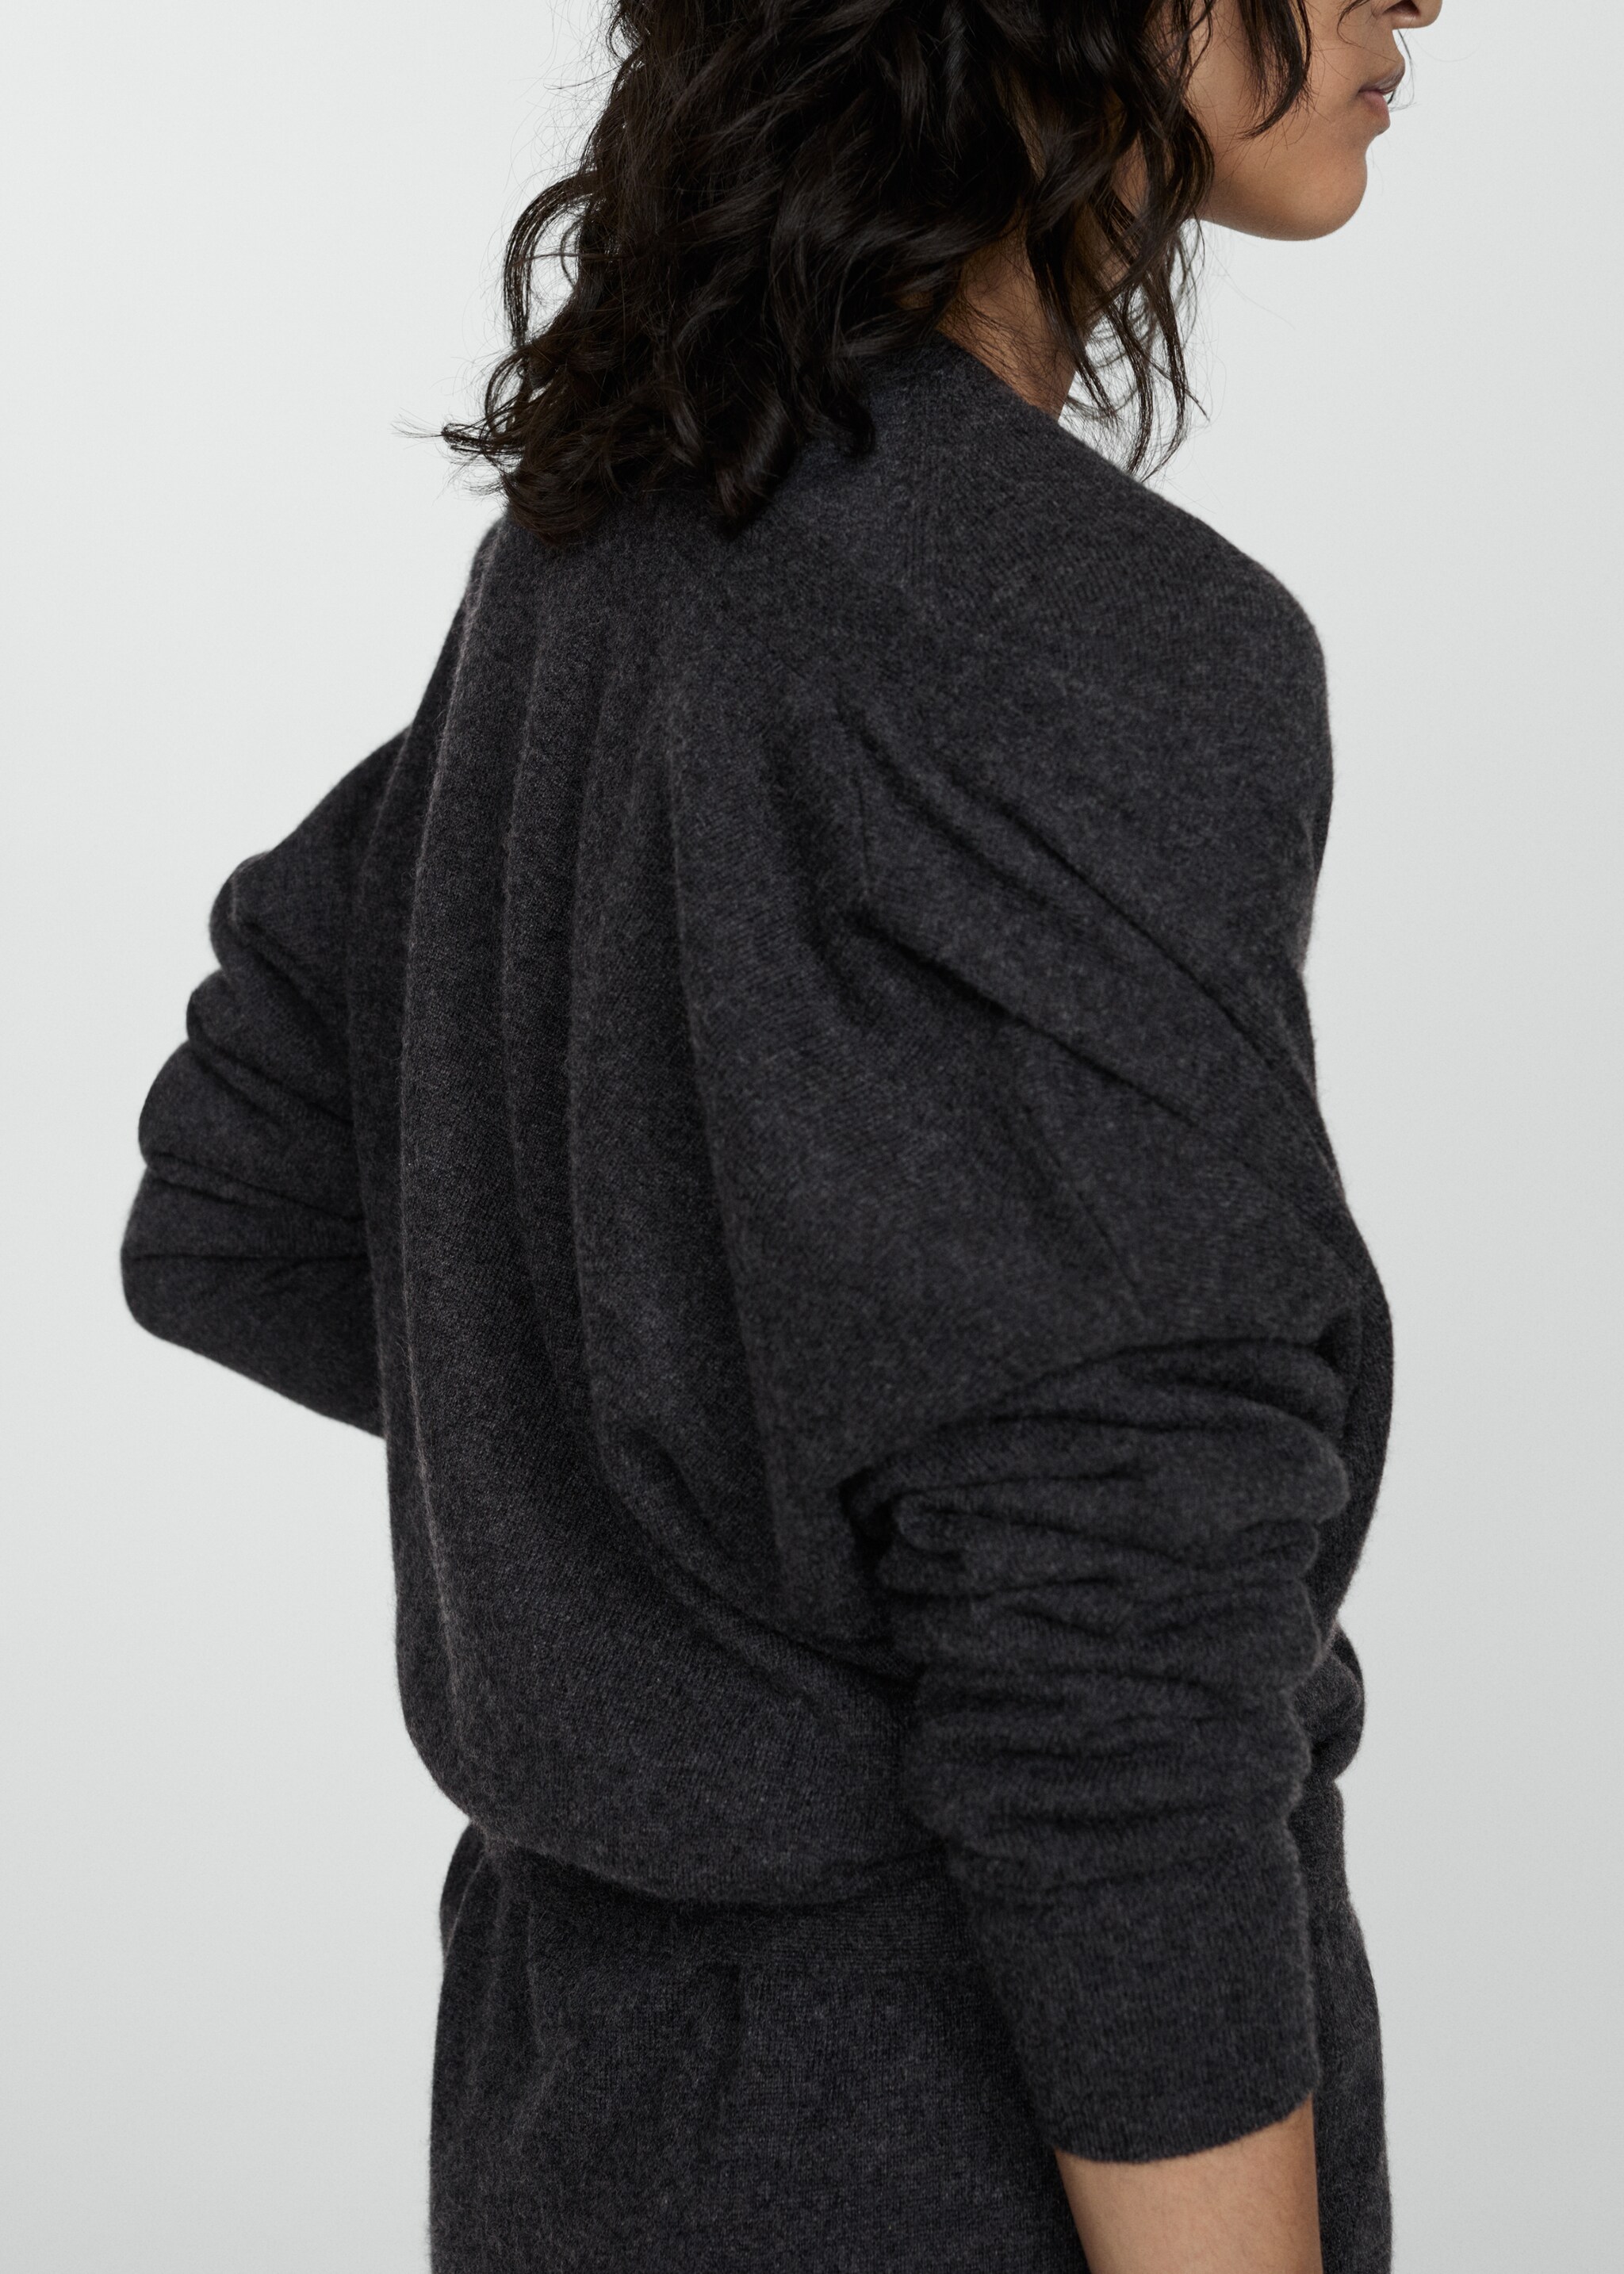 100% cashmere cardigan - Details of the article 6